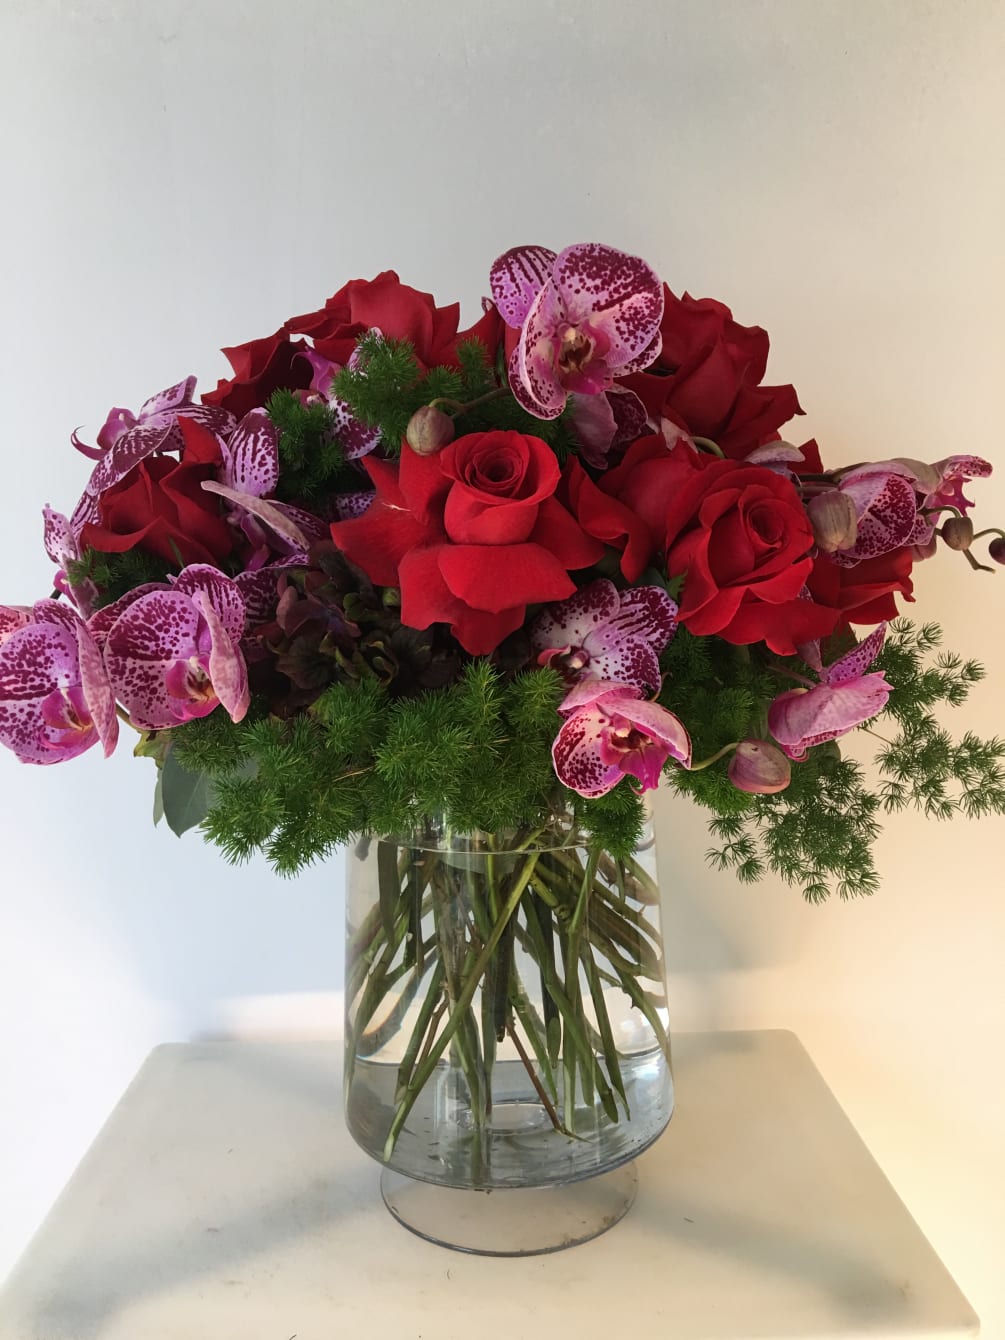 Nice arrangement with red roses and purple orquids nice arrange in a